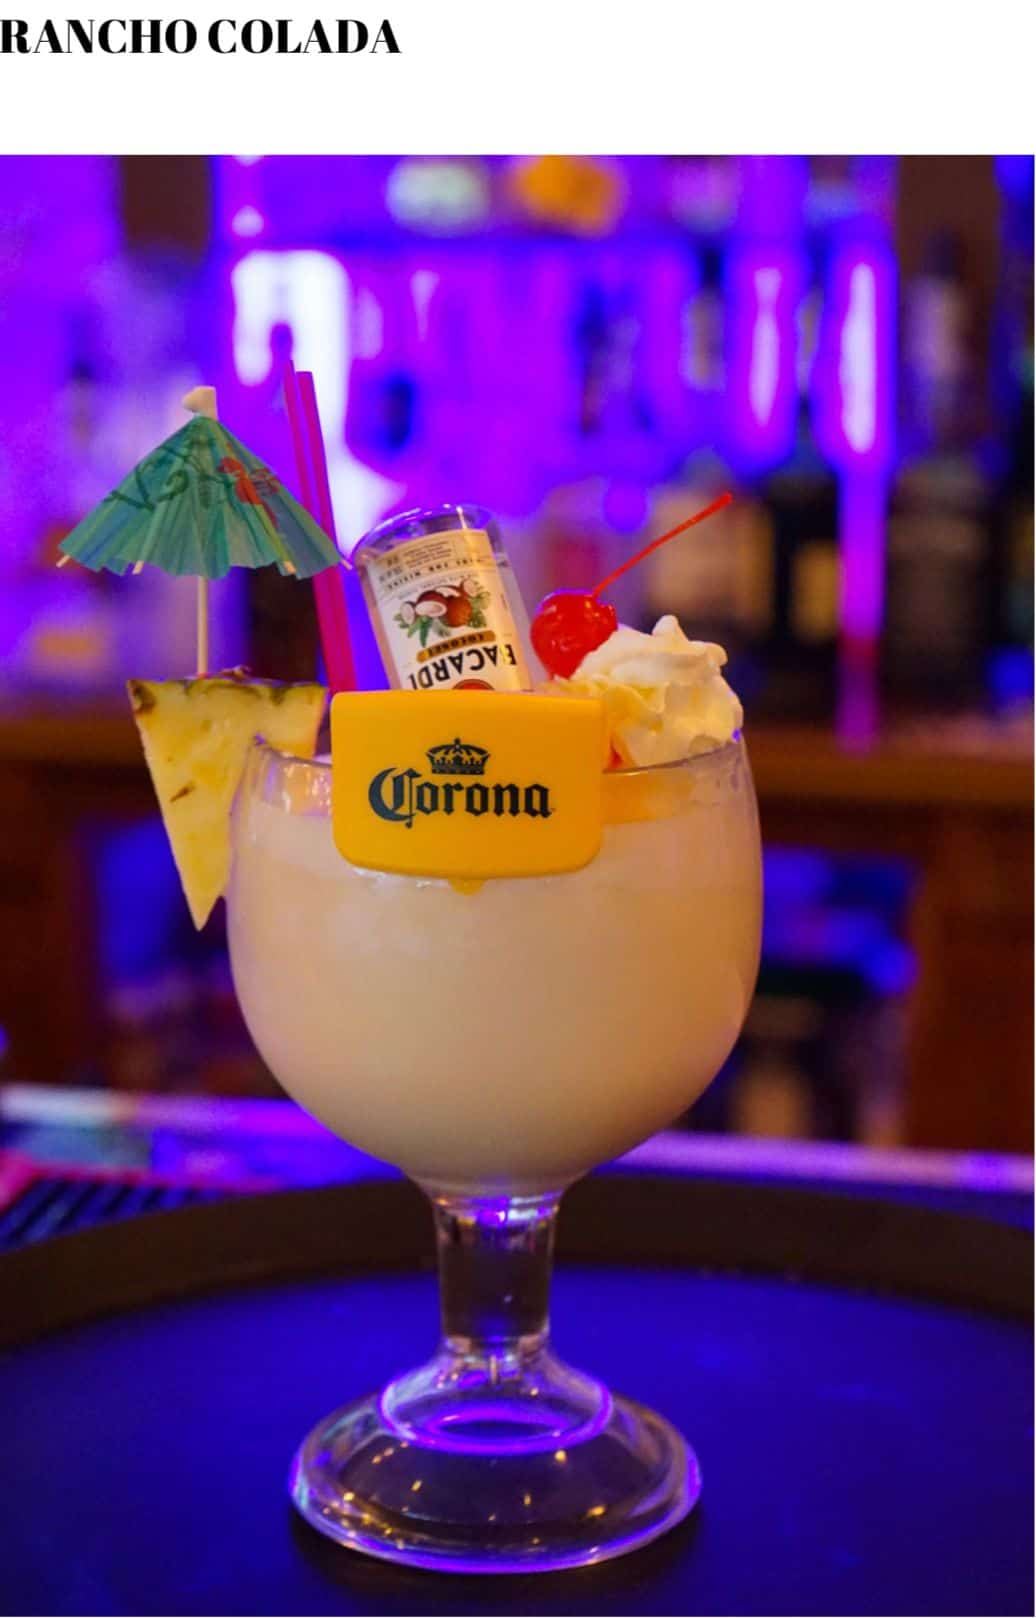 A drink with a pineapple on top of it is sitting on a bar.